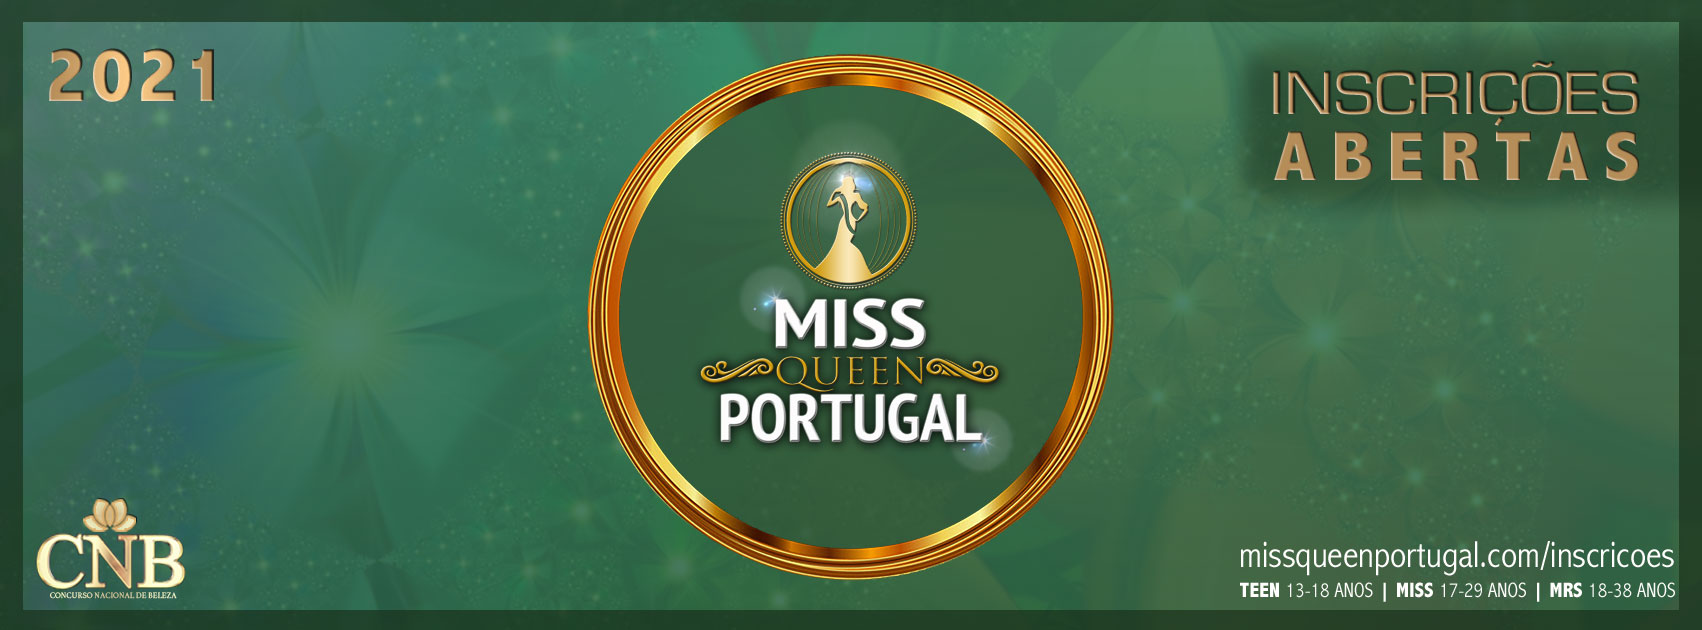 Miss-Queen-Portugal-2021-capa-CNB